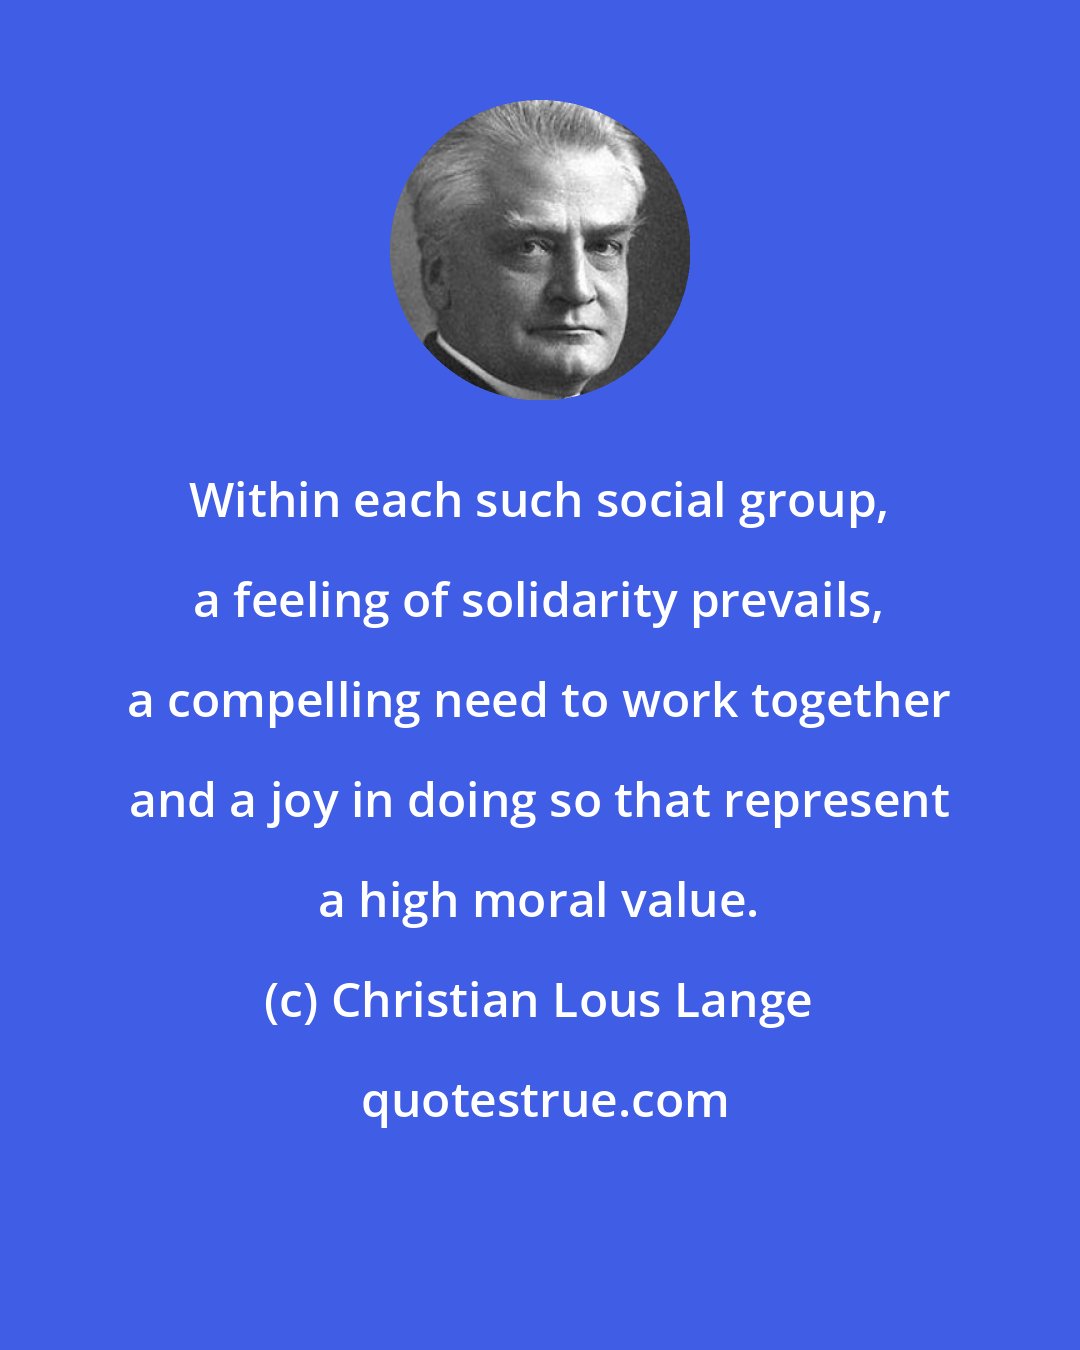 Christian Lous Lange: Within each such social group, a feeling of solidarity prevails, a compelling need to work together and a joy in doing so that represent a high moral value.